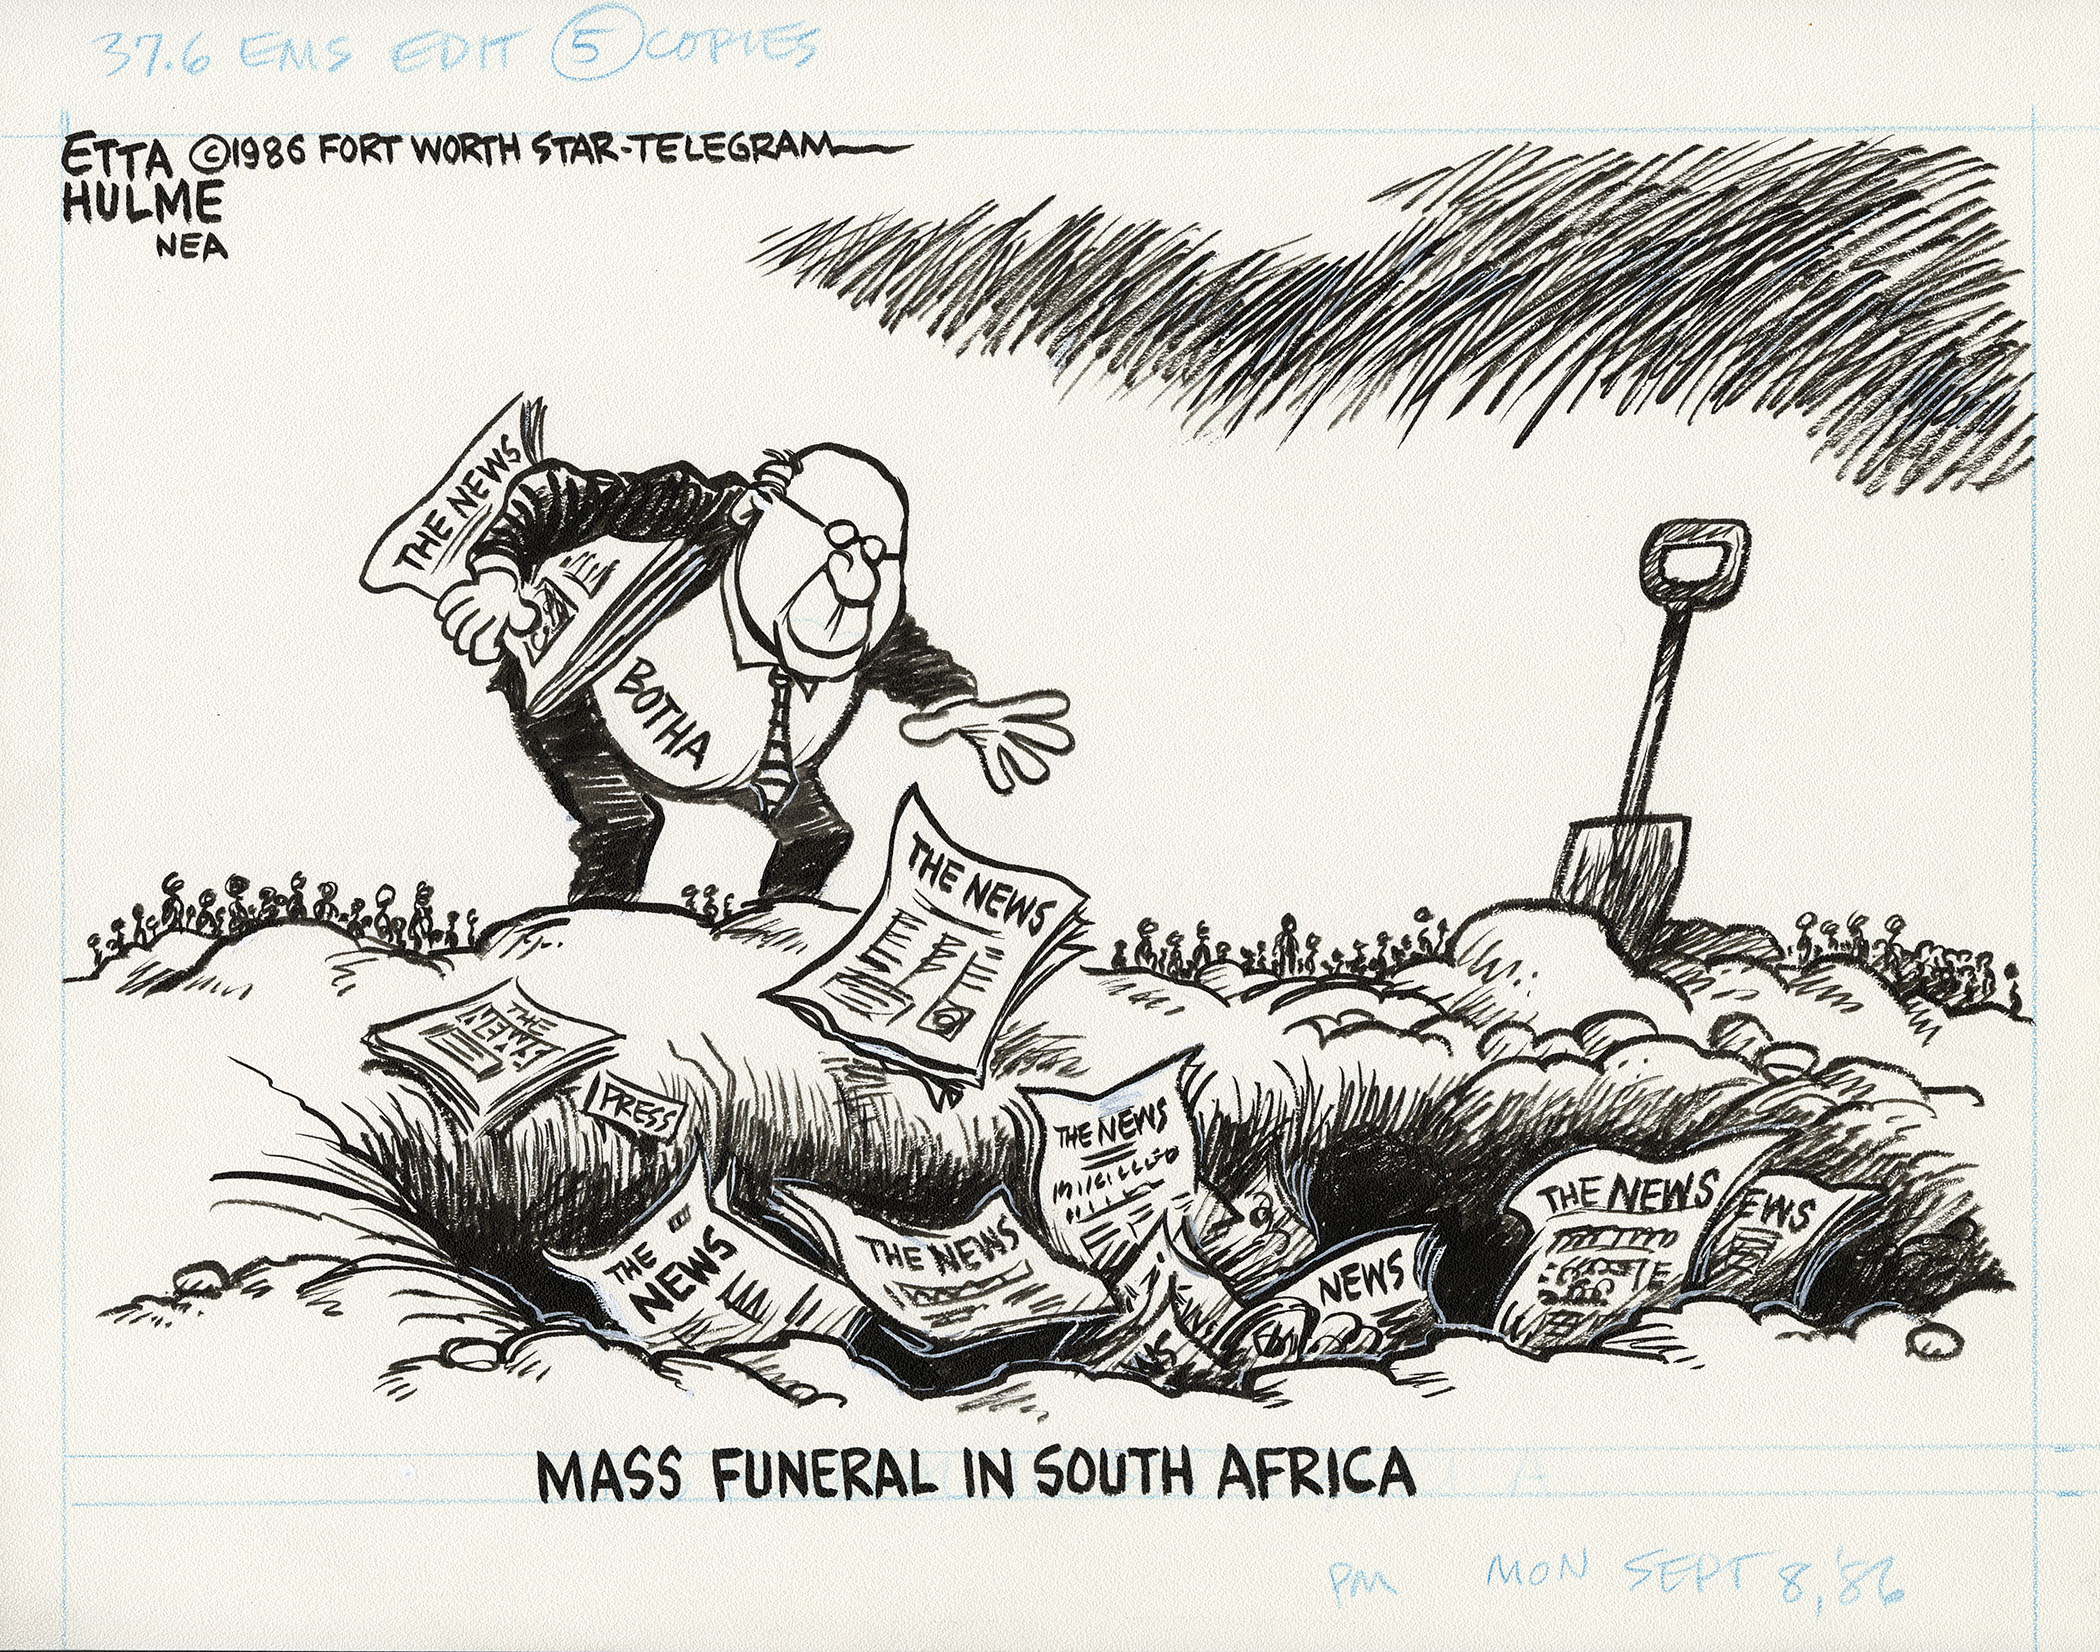 Mass funeral in South Africa